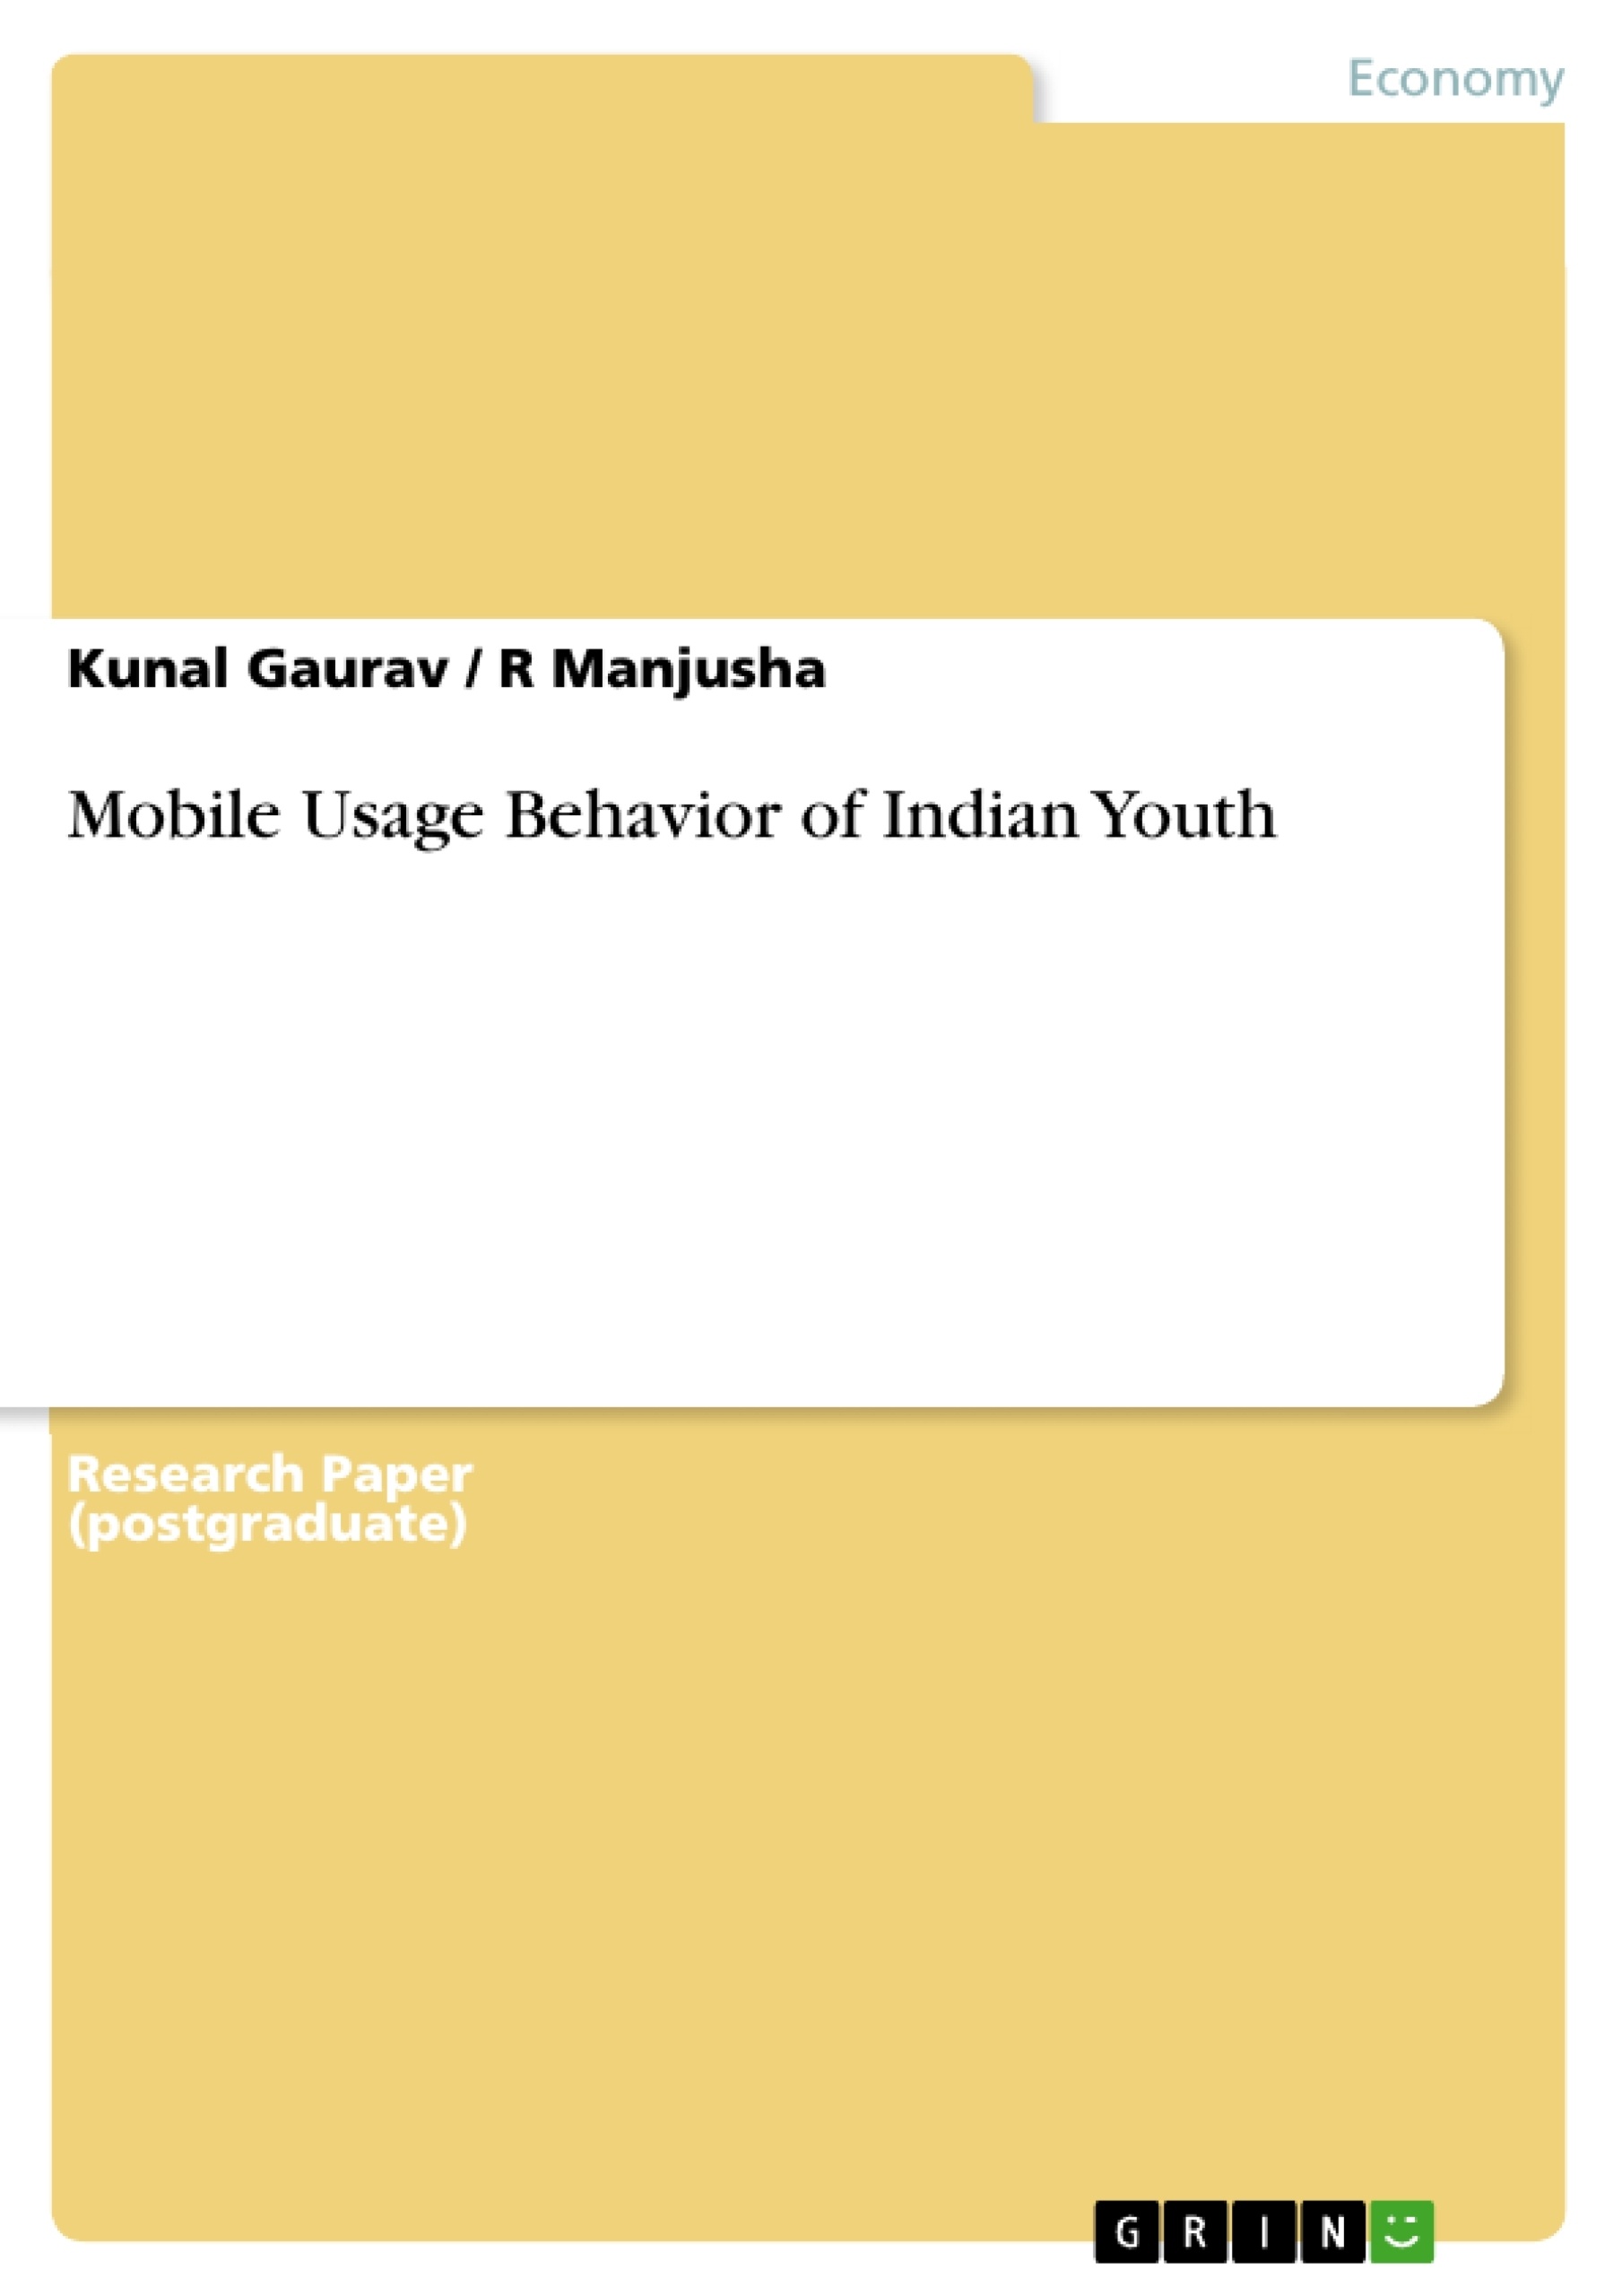 Title: Mobile Usage Behavior of Indian Youth